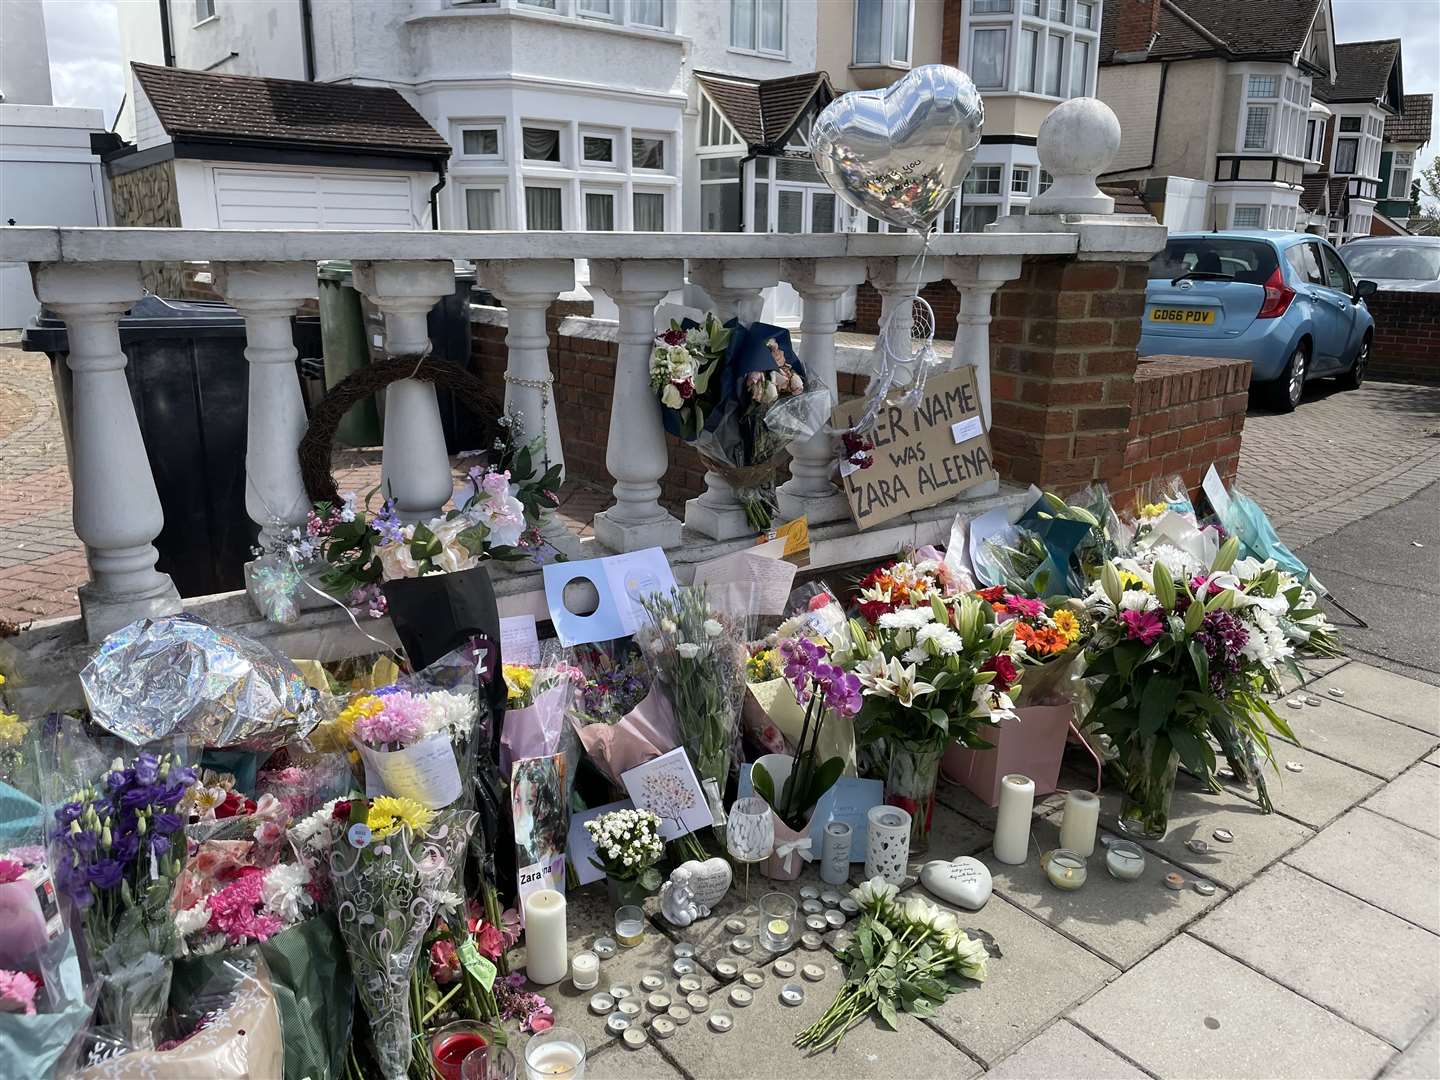 Floral tributes left at the scene on Cranbrook Road in Ilford, east London, where Zara Aleena, 35, was murdered (Ted Hennessey/PA)